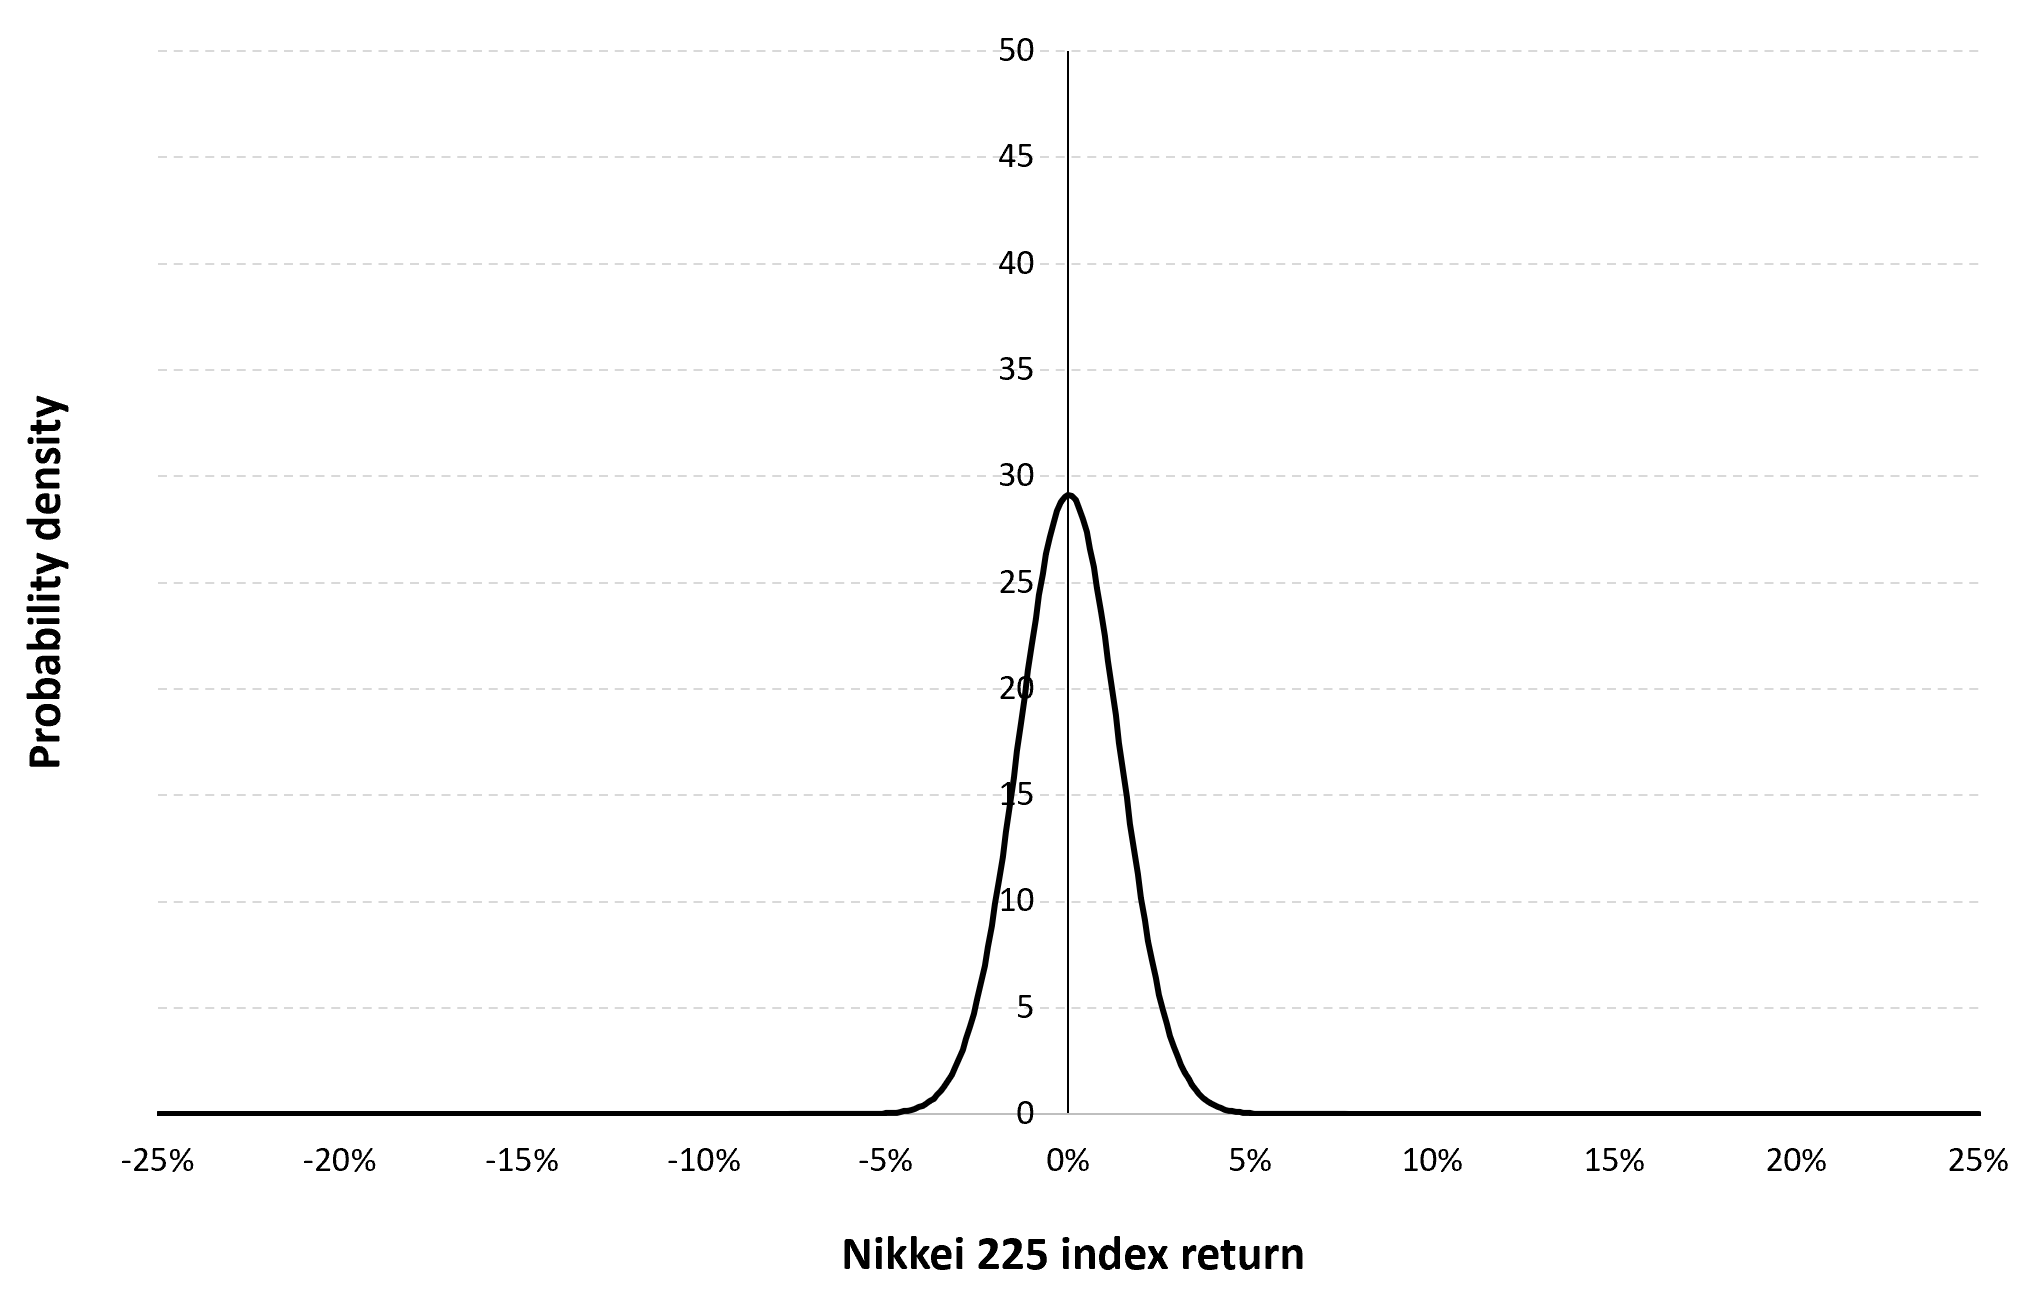 Gaussian distribution of the daily Nikkei 225 index returns